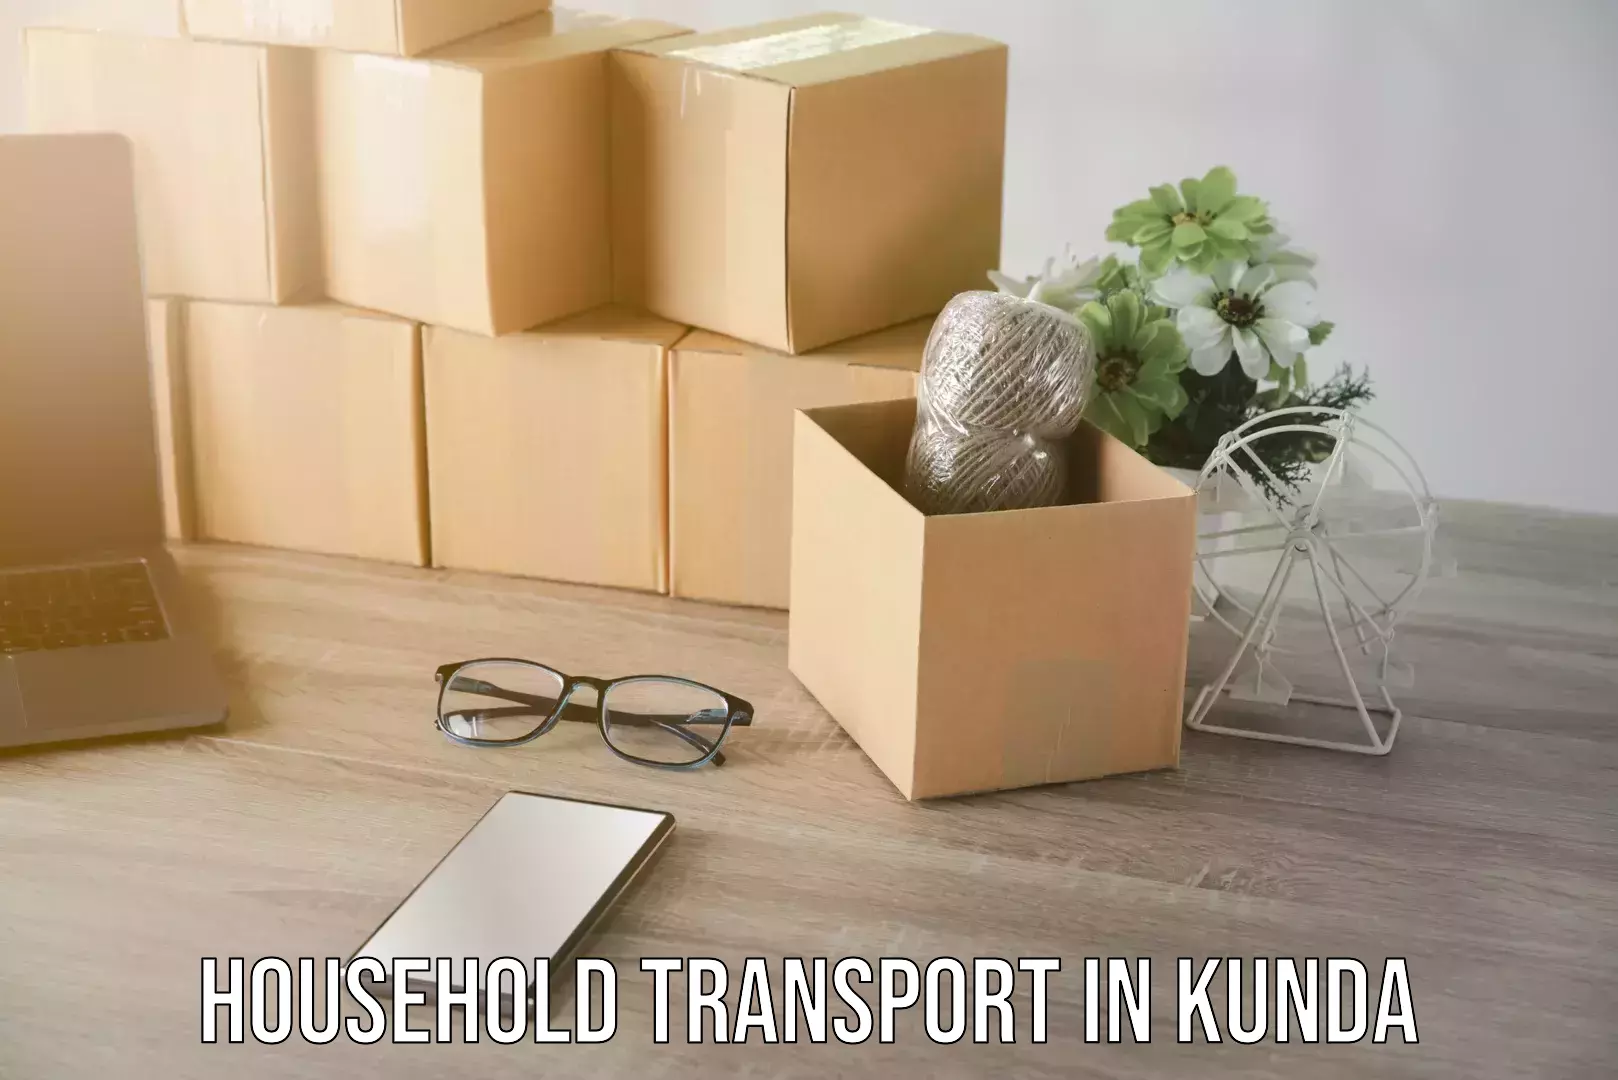 Furniture moving specialists in Kunda